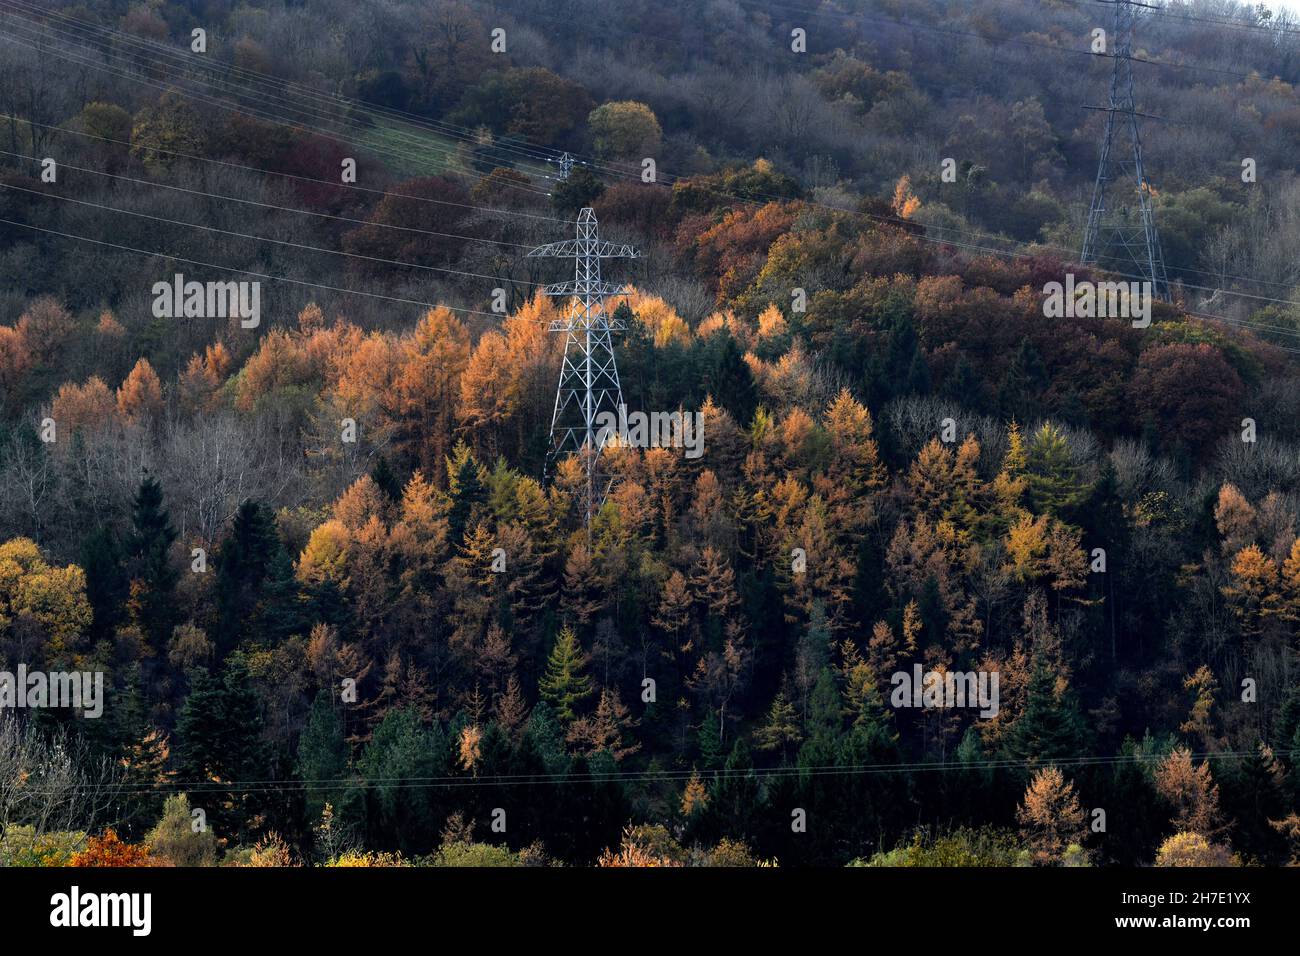 Electricity pylons and cables amongst woodland trees in Autumn, Britain, Uk Stock Photo